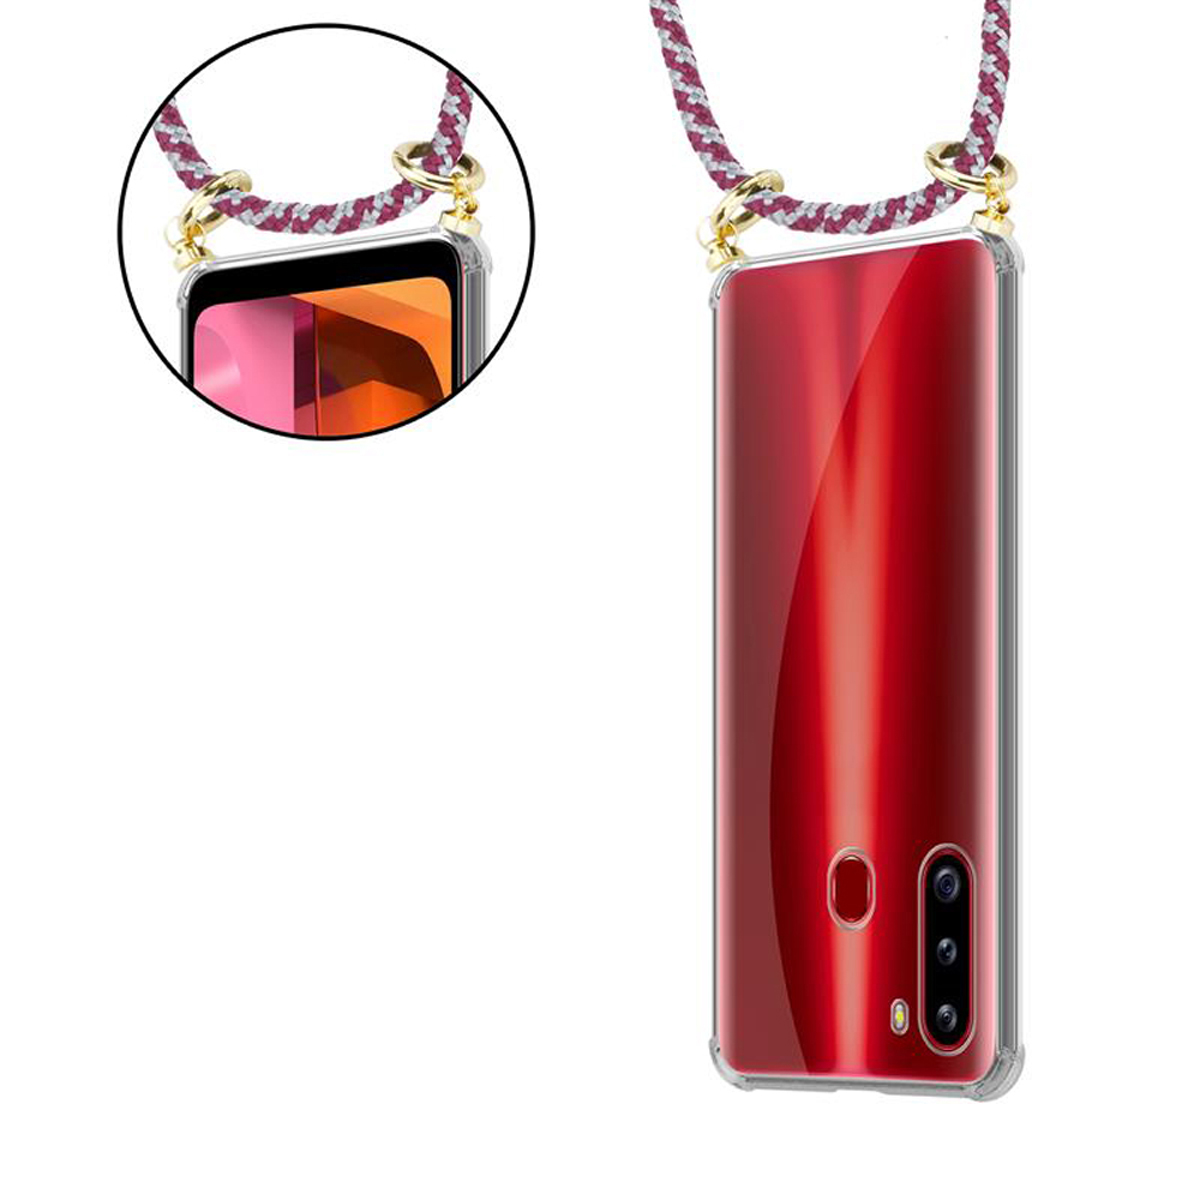 CADORABO Handy Kette mit Gold und abnehmbarer ROT A21, Ringen, Samsung, Kordel WEIß Band Hülle, Galaxy Backcover